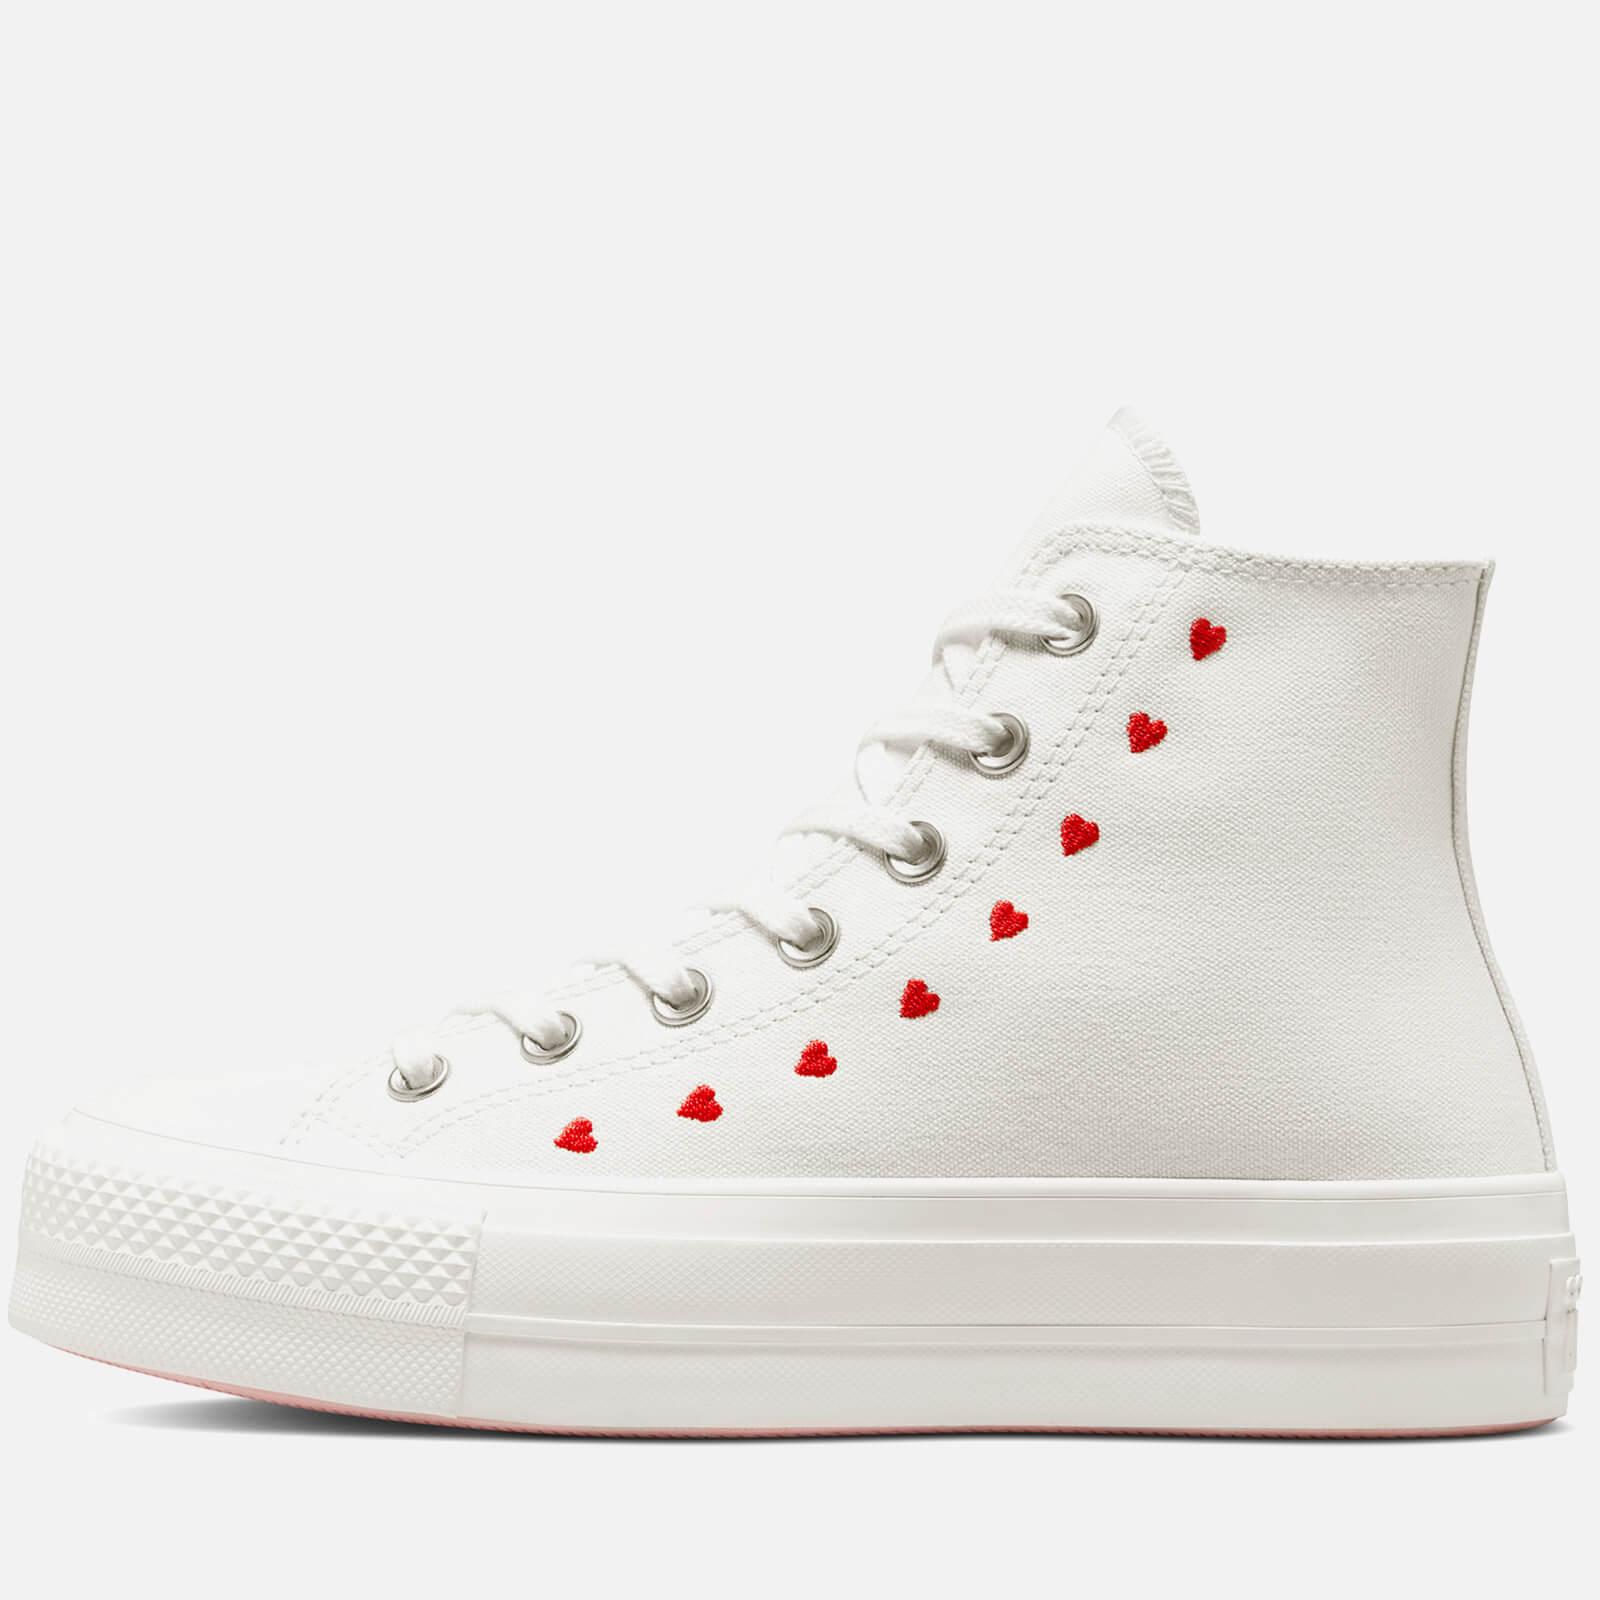 Converse Chuck Taylor All Star Crafted With Love Lift Hi-top Trainers in  White | Lyst